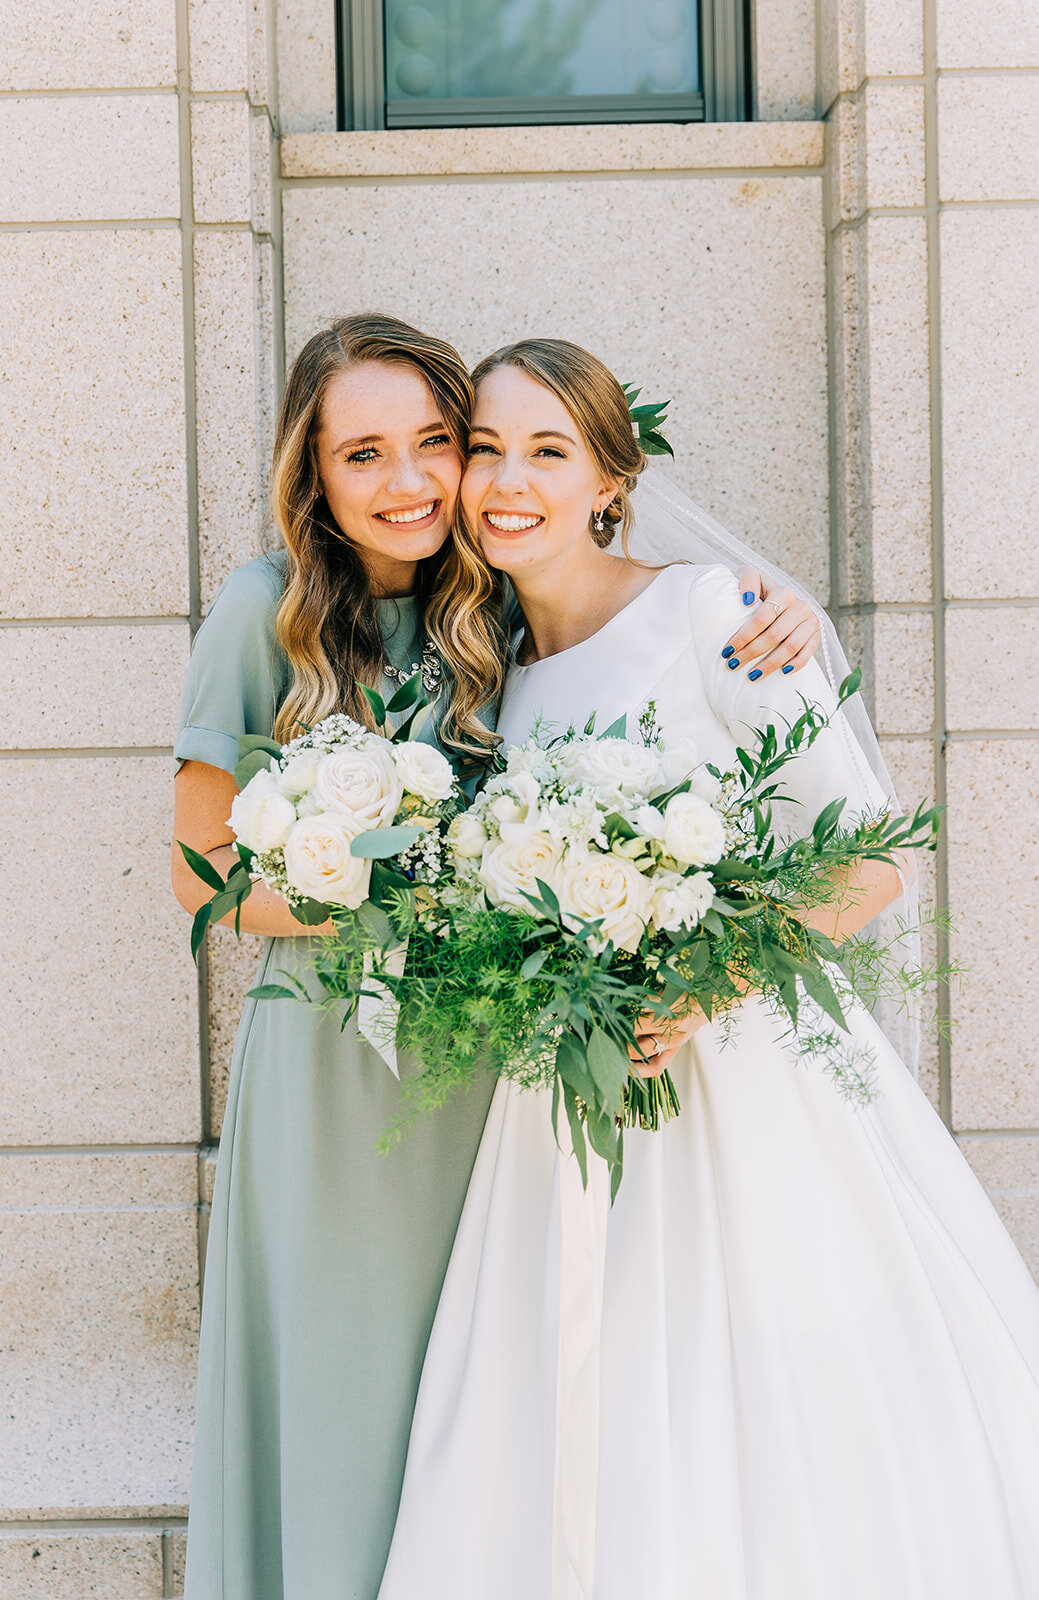  bride posing with her bridesmaid friends and family at the wedding sea green bridesmaid dress inspiration floral bouquet bridal attire ensemble inspiration for summer wedding inspo lds bride temple wedding pictures after the sealing hair and make-up